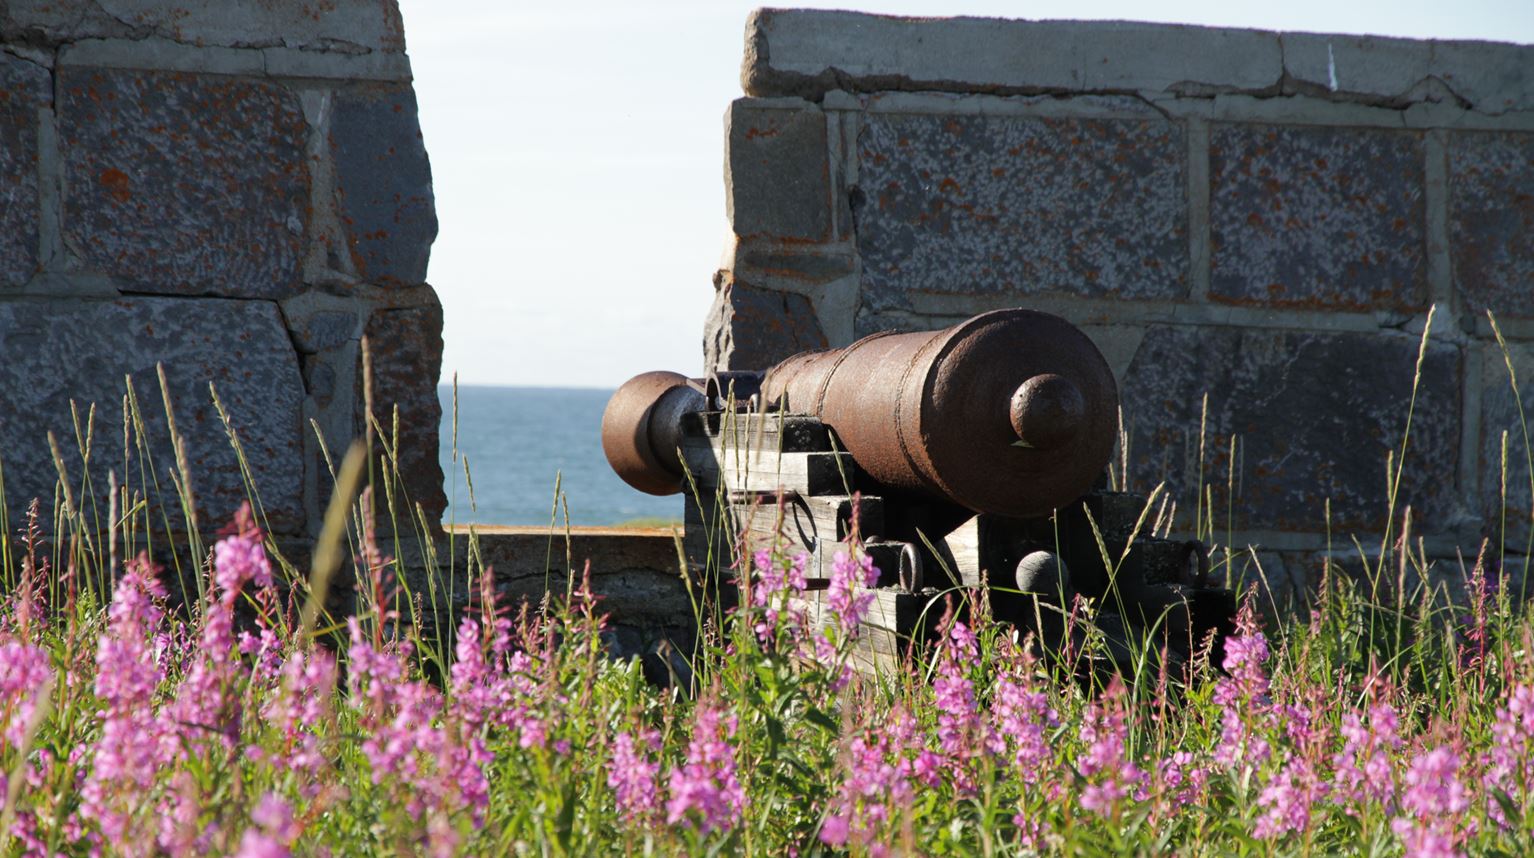 Prince Wales Canon facing water from an old wall and a flower field.